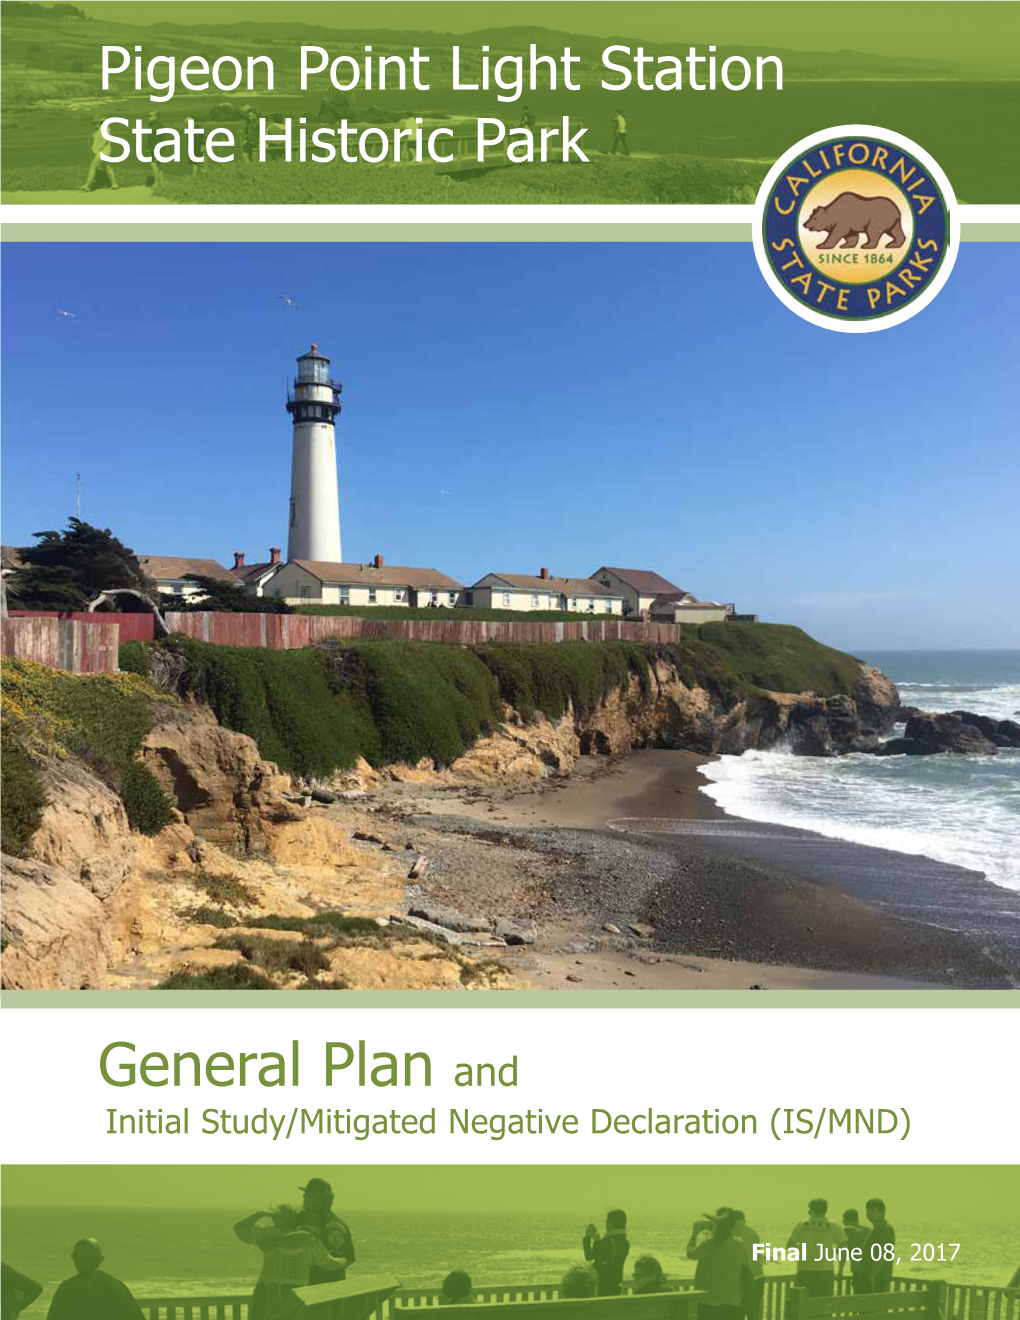 Pigeon Point Light Station State Historic Park General Plan and Initial Study/Mitigated Negative Declaration (IS/MND)